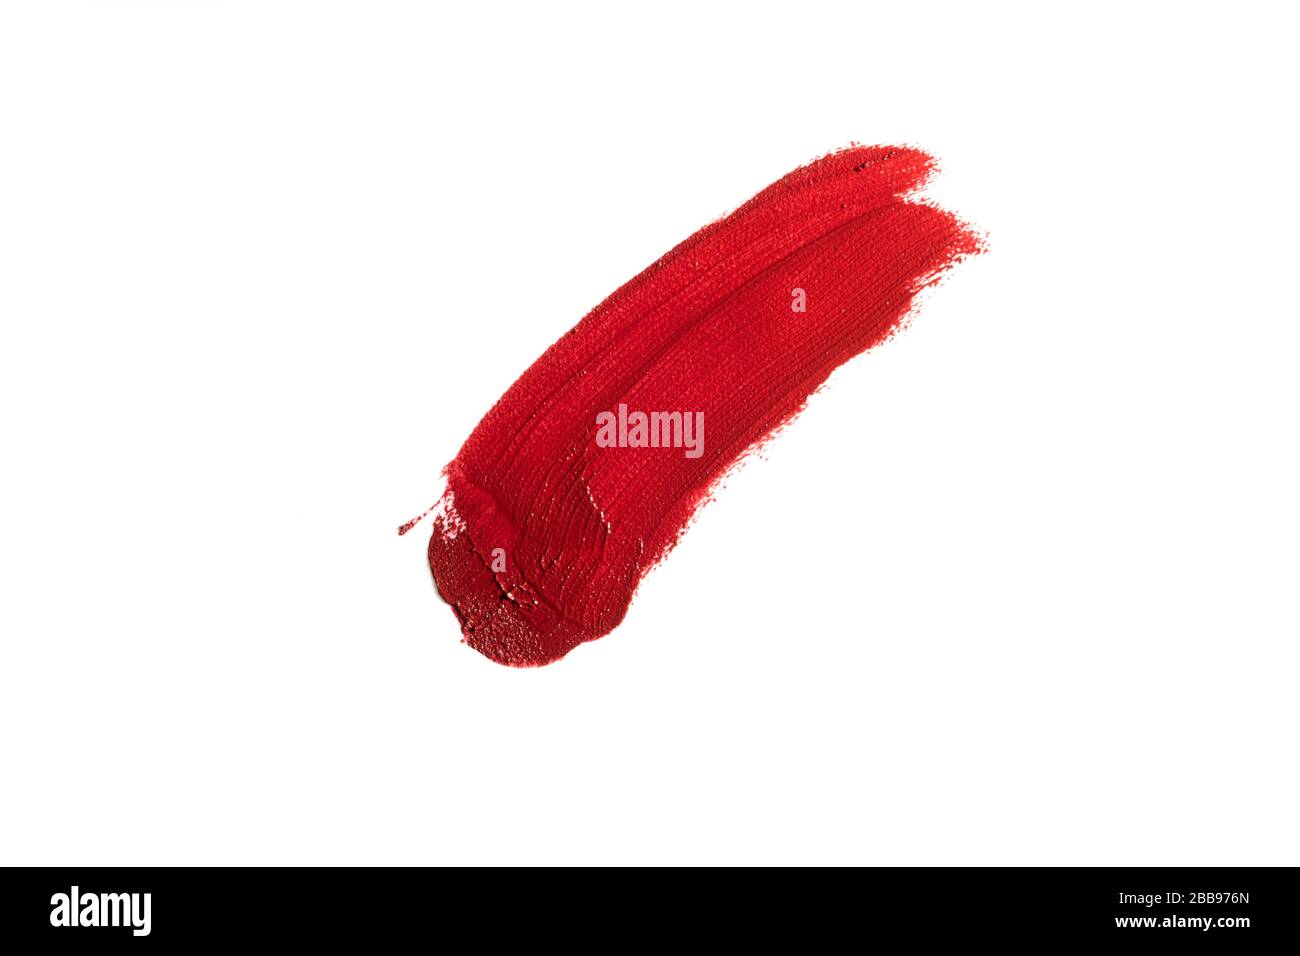 Red lipstick cosmetic product brush stroke swipe sample. Lipstick swatch smudge smear isolated on white background. Cream makeup texture. Stock Photo